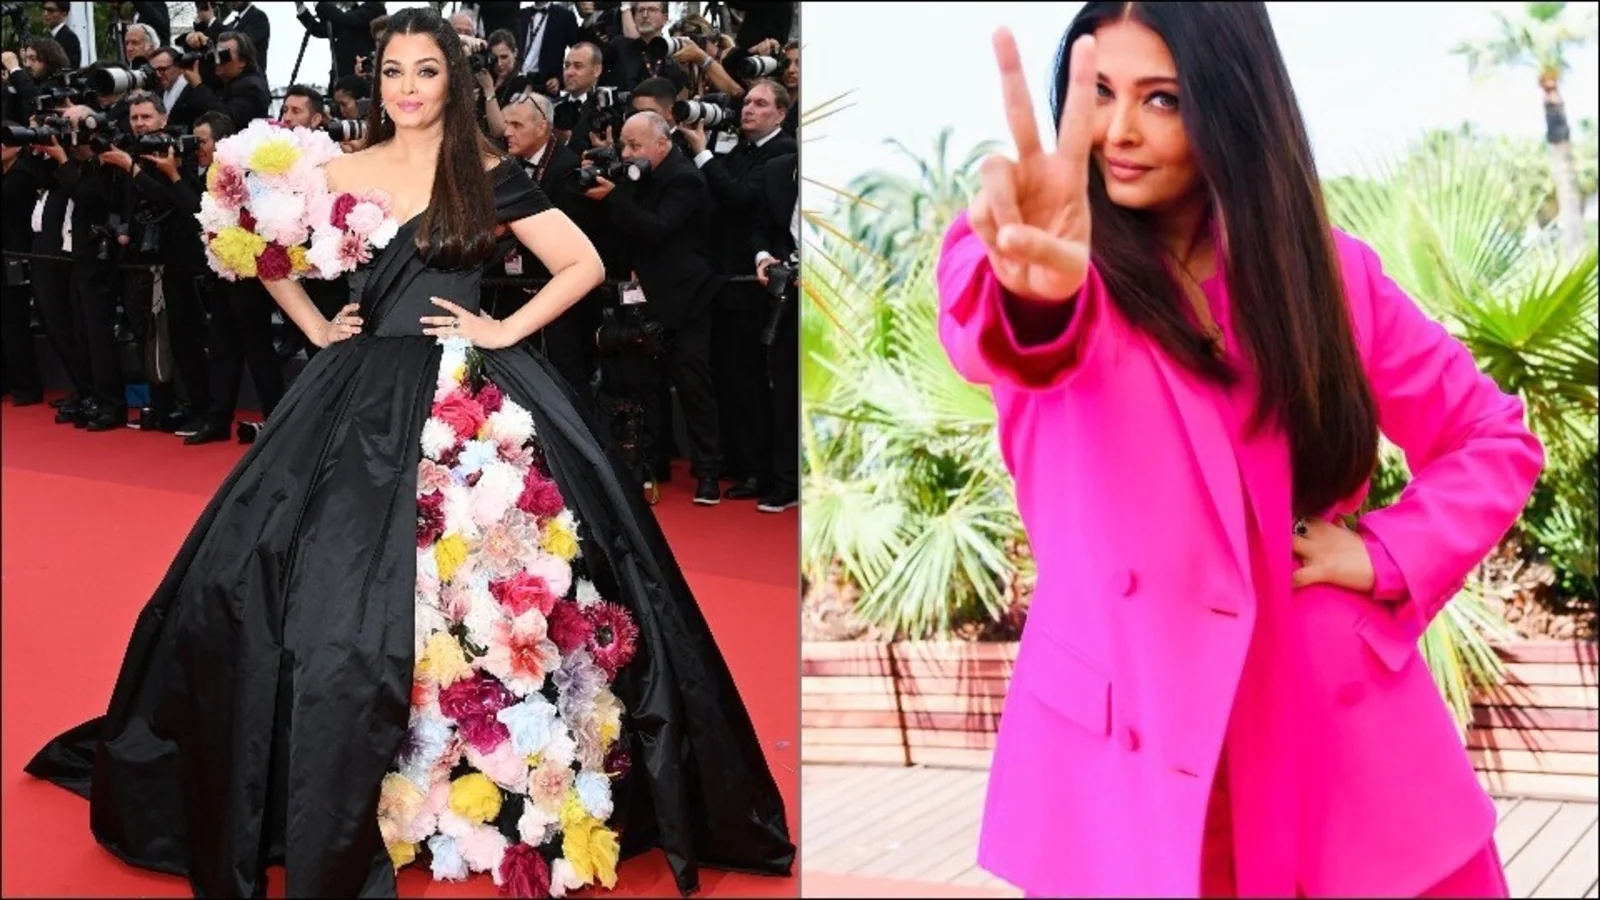 Cannes 2022: Aishwarya Rai’s dramatic looks from Dolce & Gabbana black gown with 3D flowers to hot pink Valentino suit